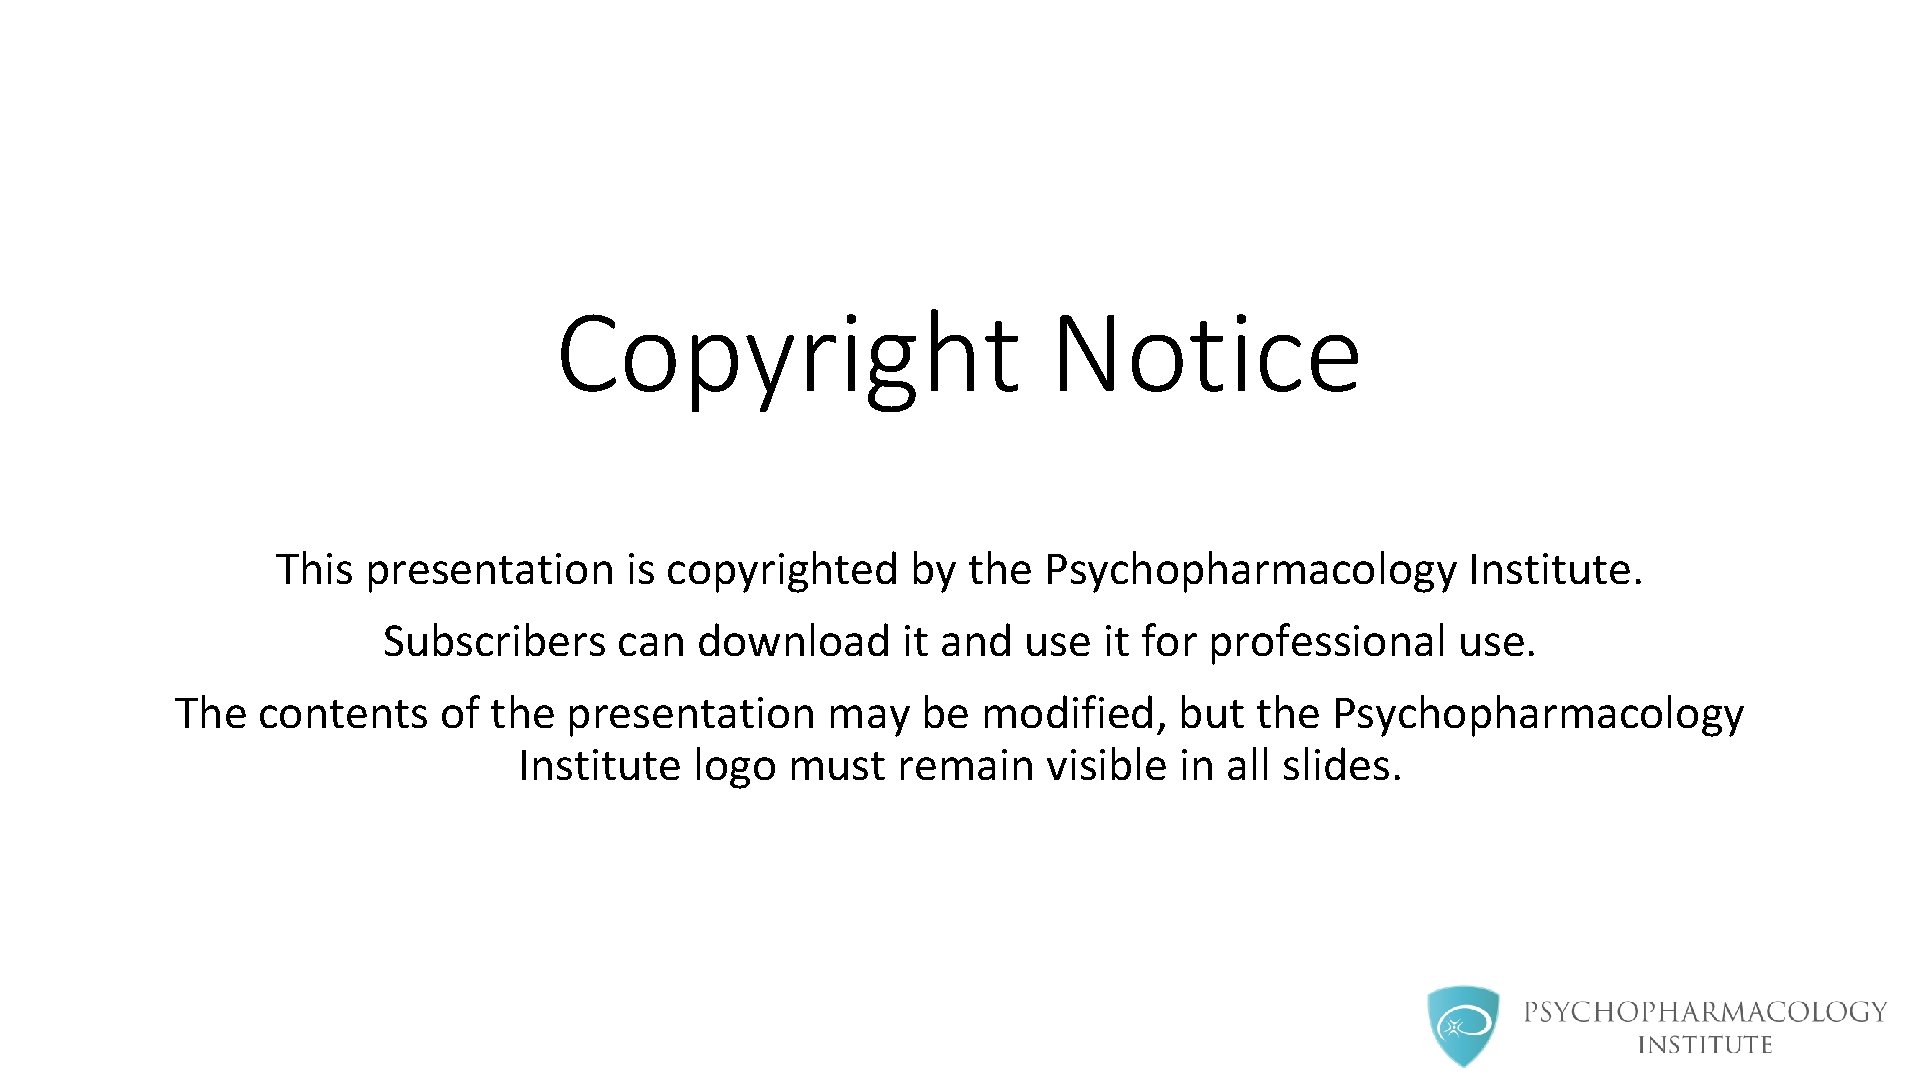 Copyright Notice This presentation is copyrighted by the Psychopharmacology Institute. Subscribers can download it